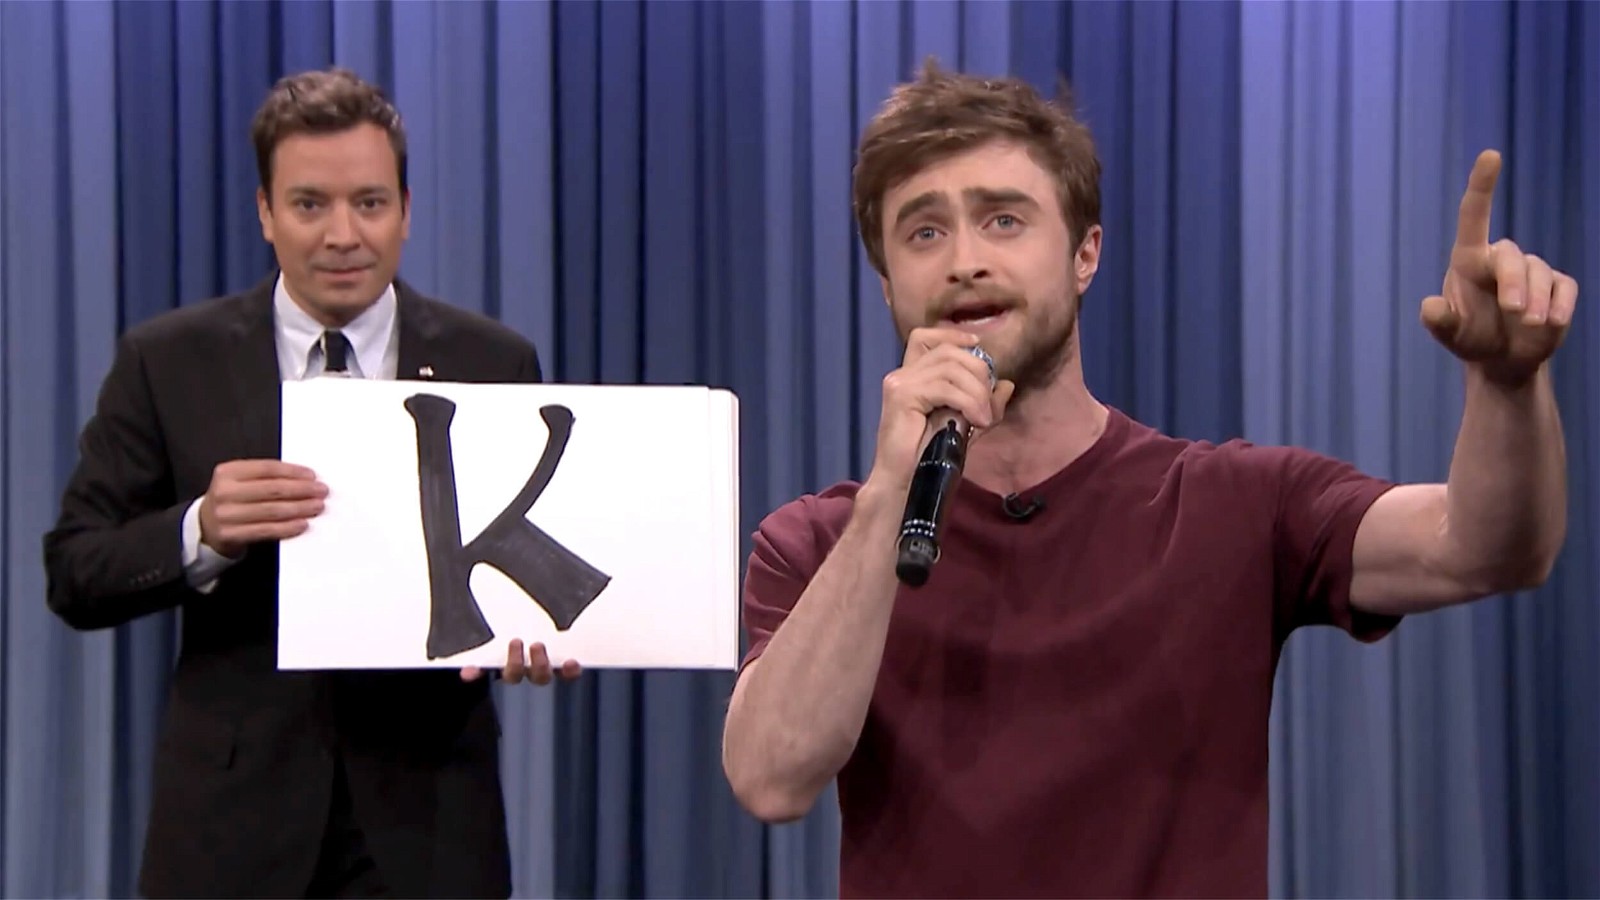 Daniel Radcliffe flaunted his rapping skills at The Tonight Show